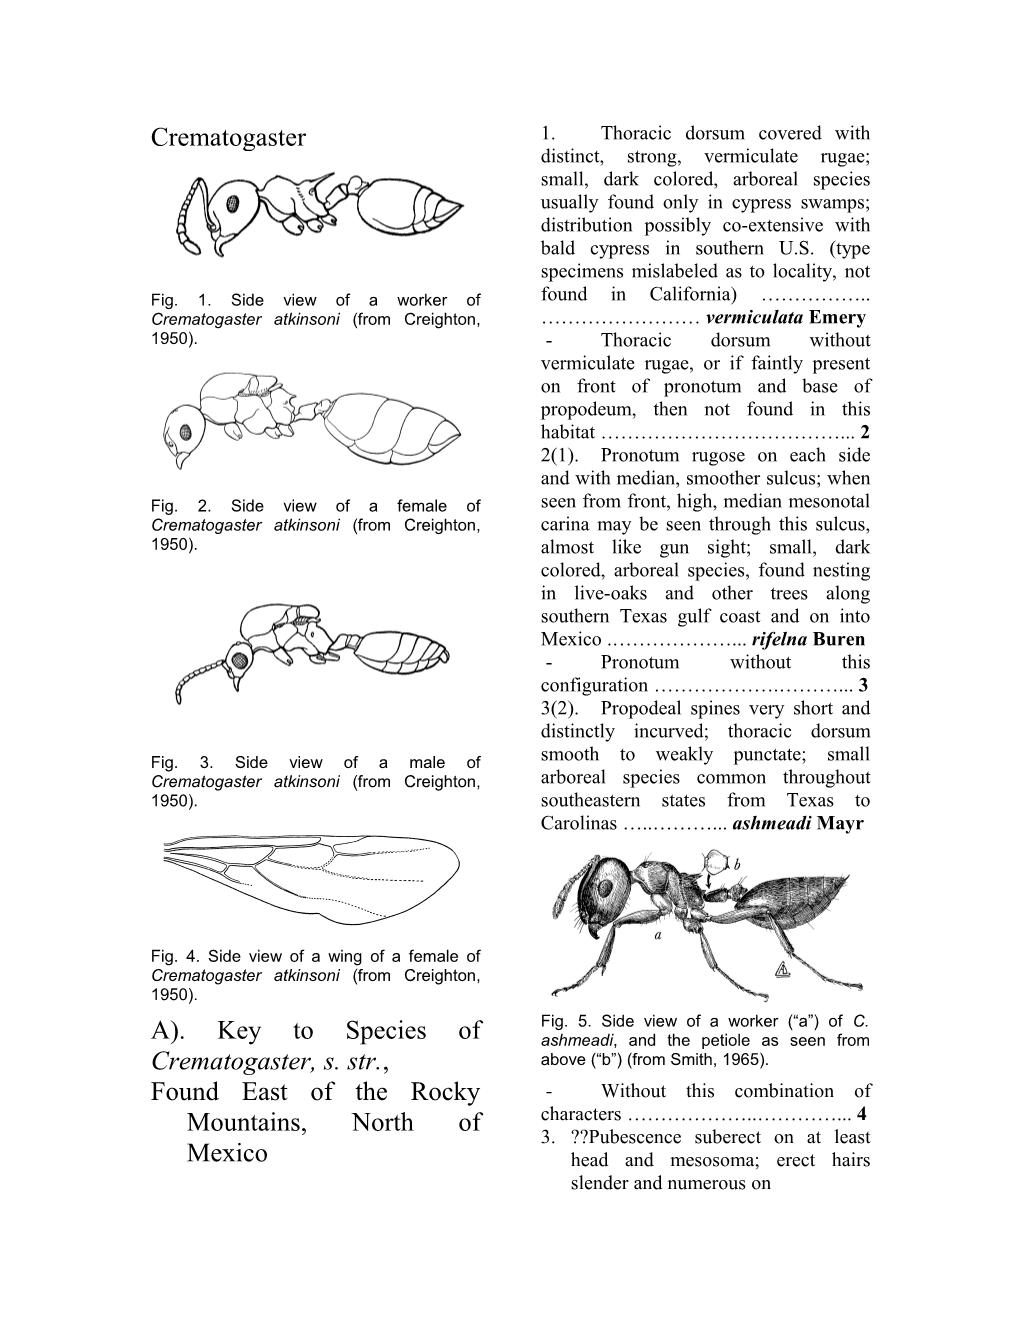 Key to Species of Crematogaster, S